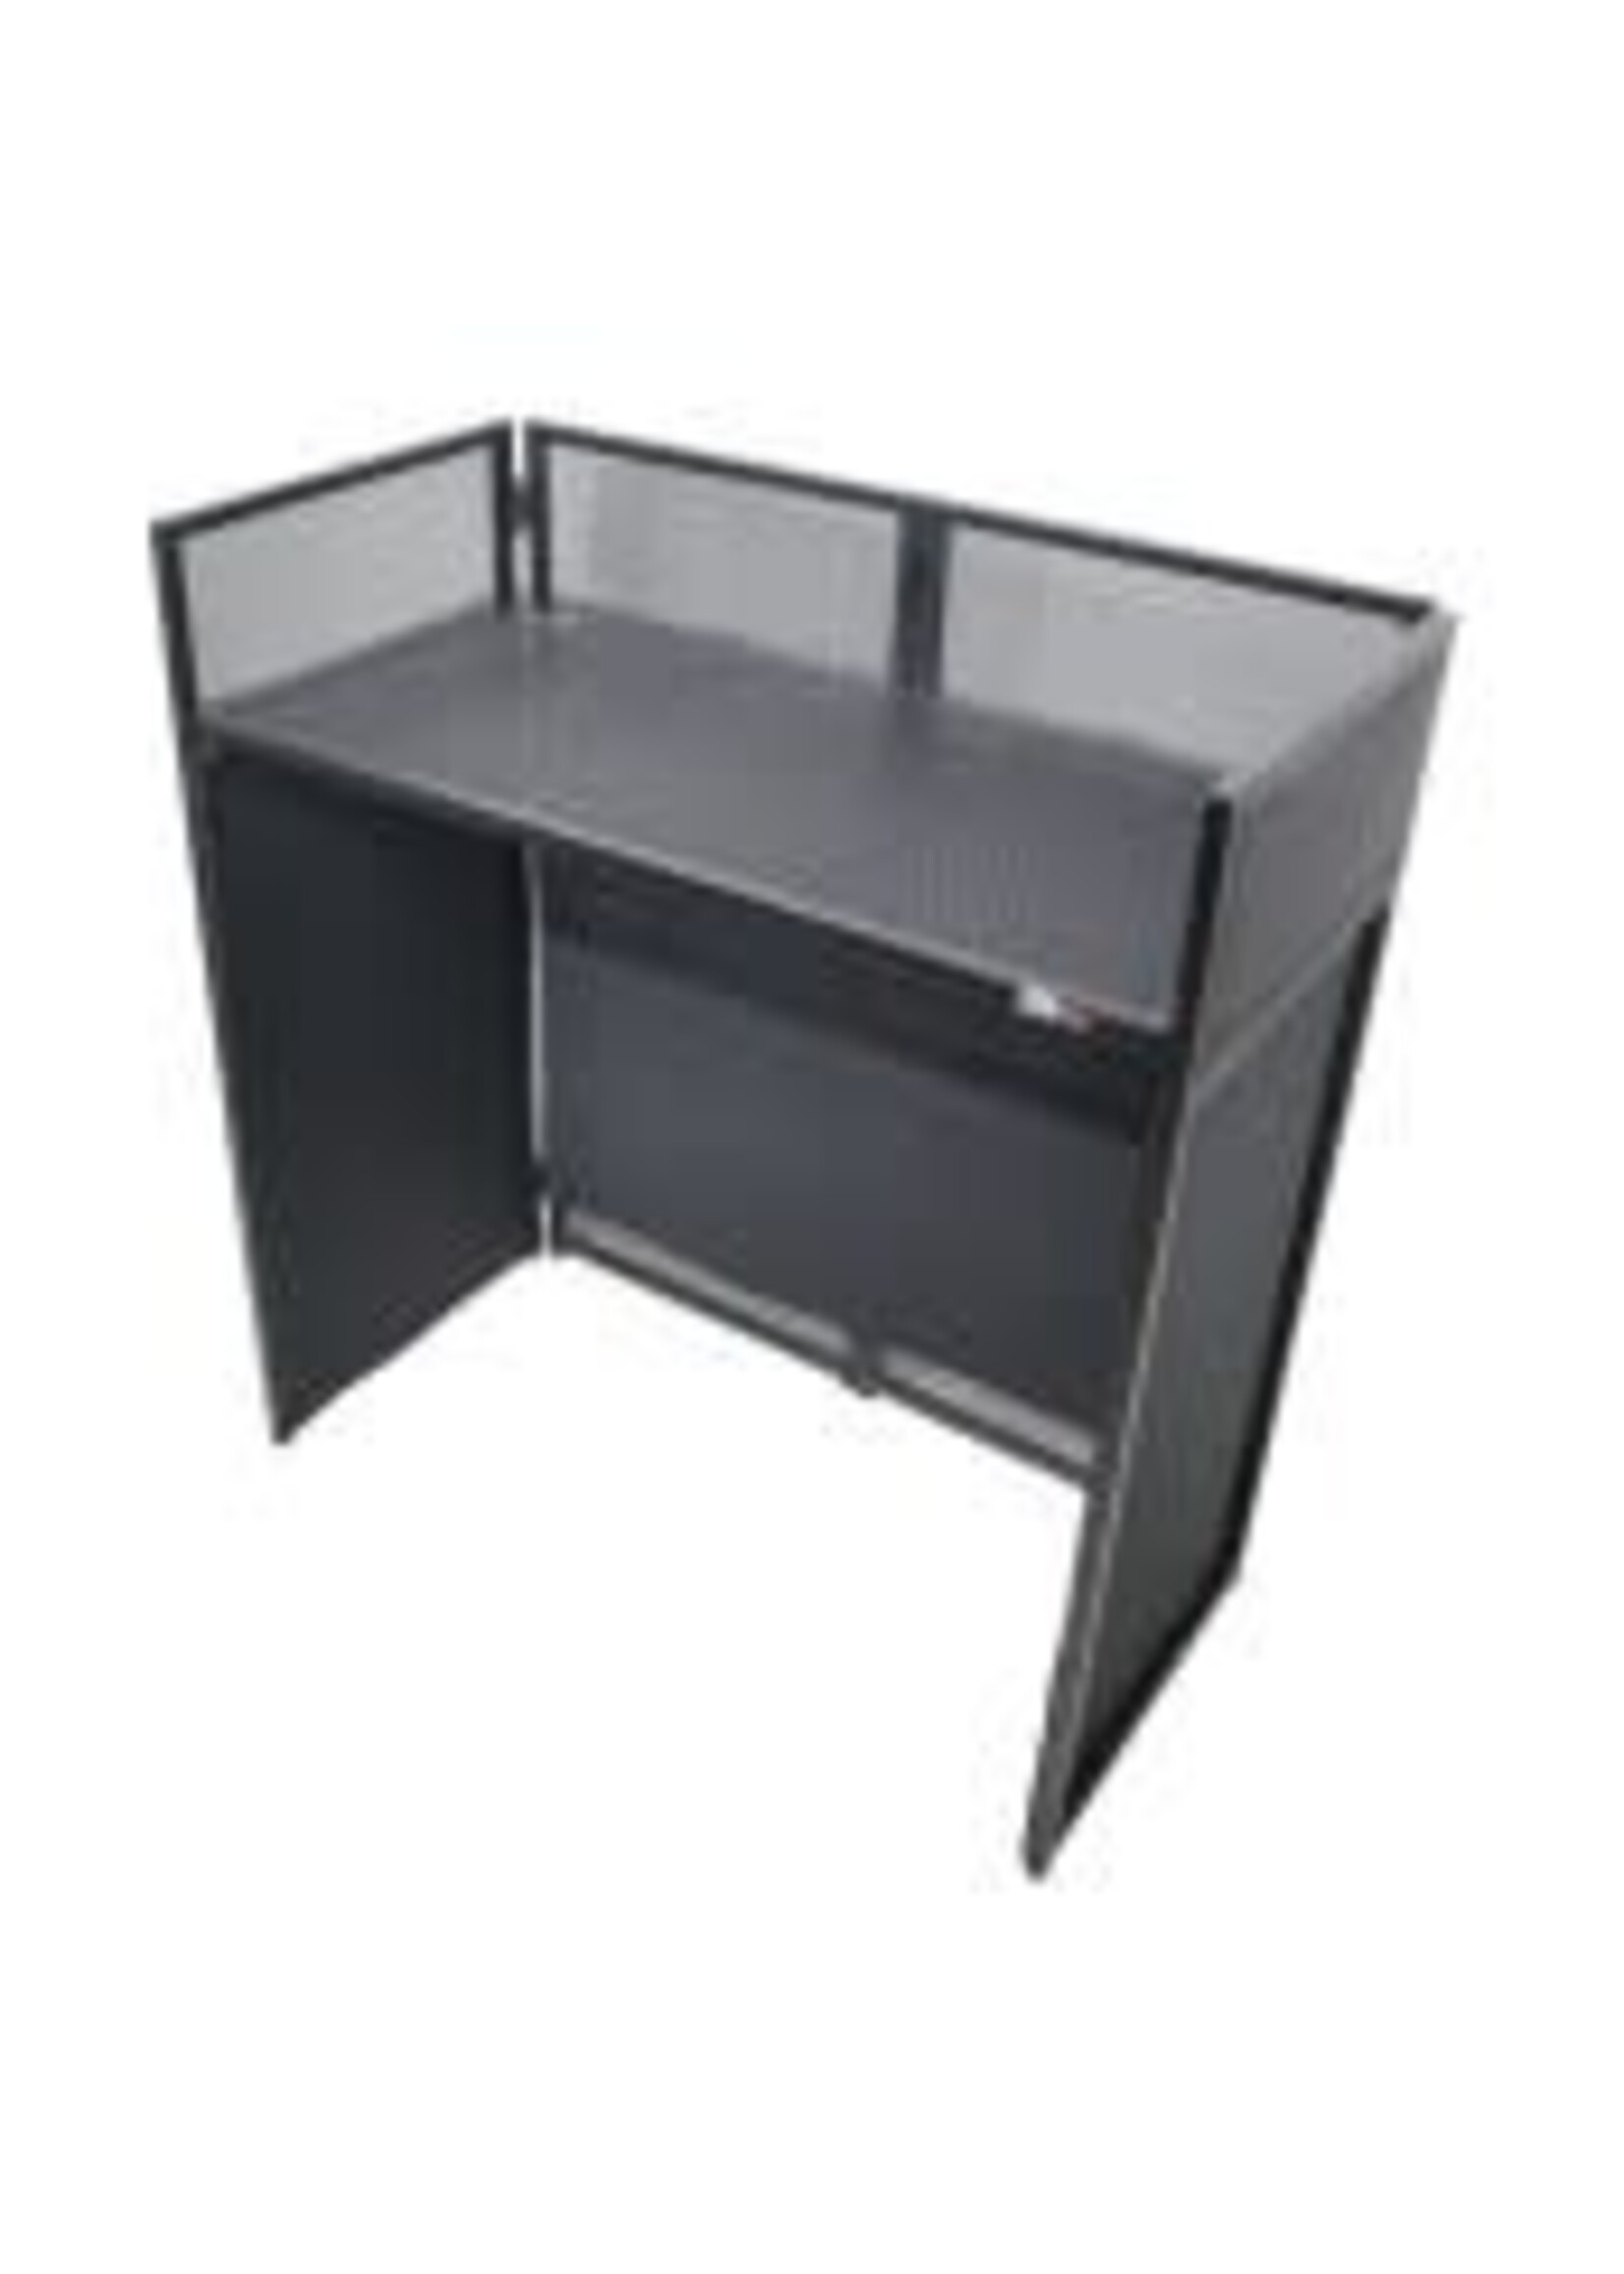 ProX ProX XF-VISTA BL DJ Booth Facade Table Station Black Frame with White/Black Scrim kit and Padded Travel Bag